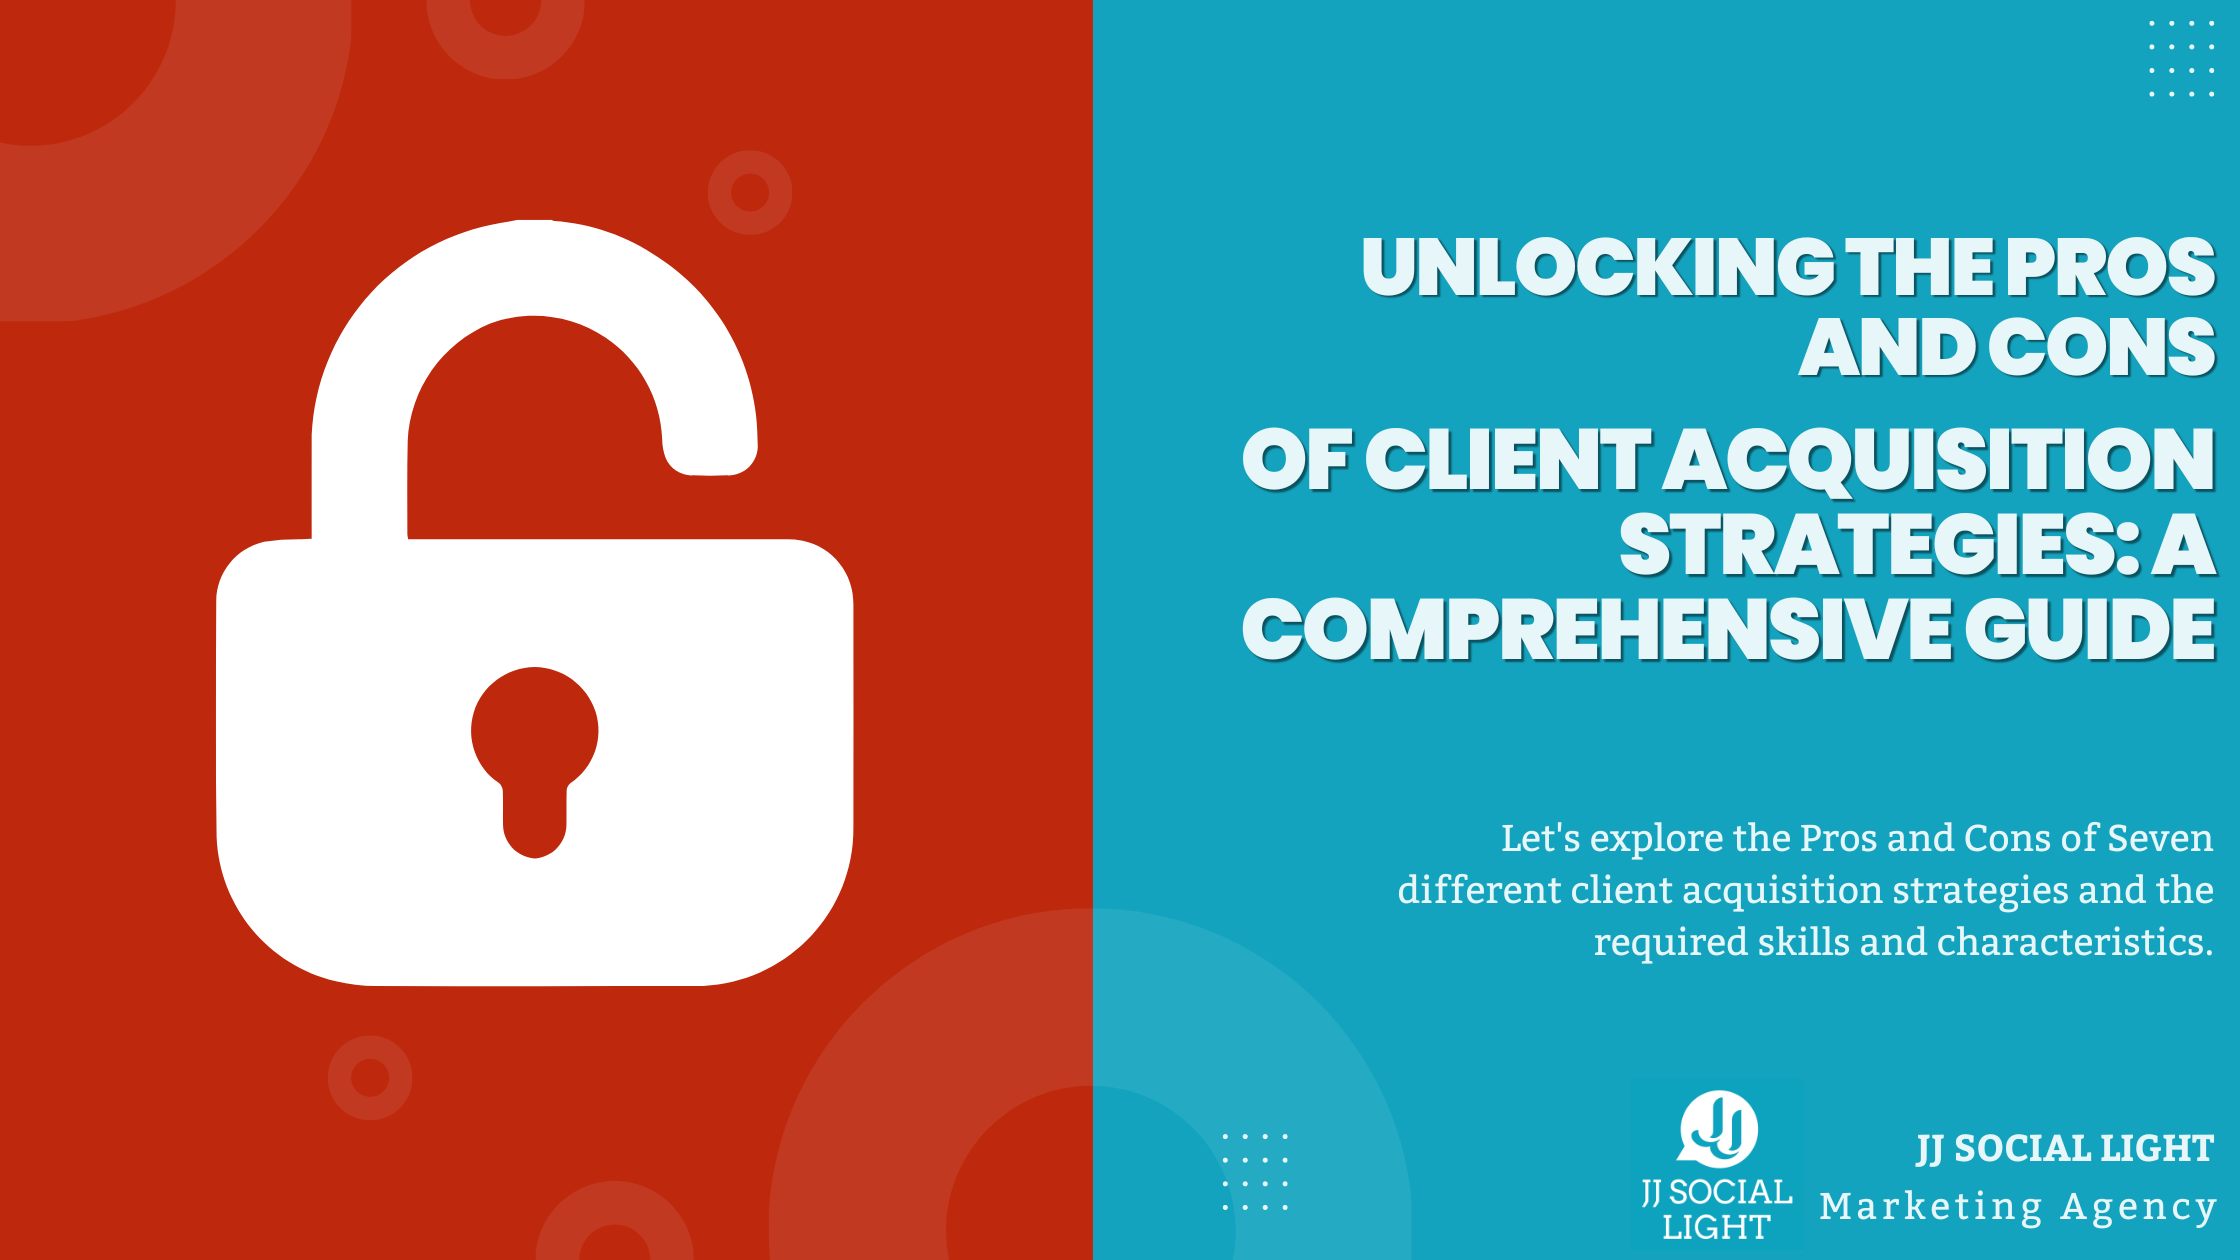 Unlocking the Pros and Cons of Client Acquisition Strategies: A Comprehensive Guide